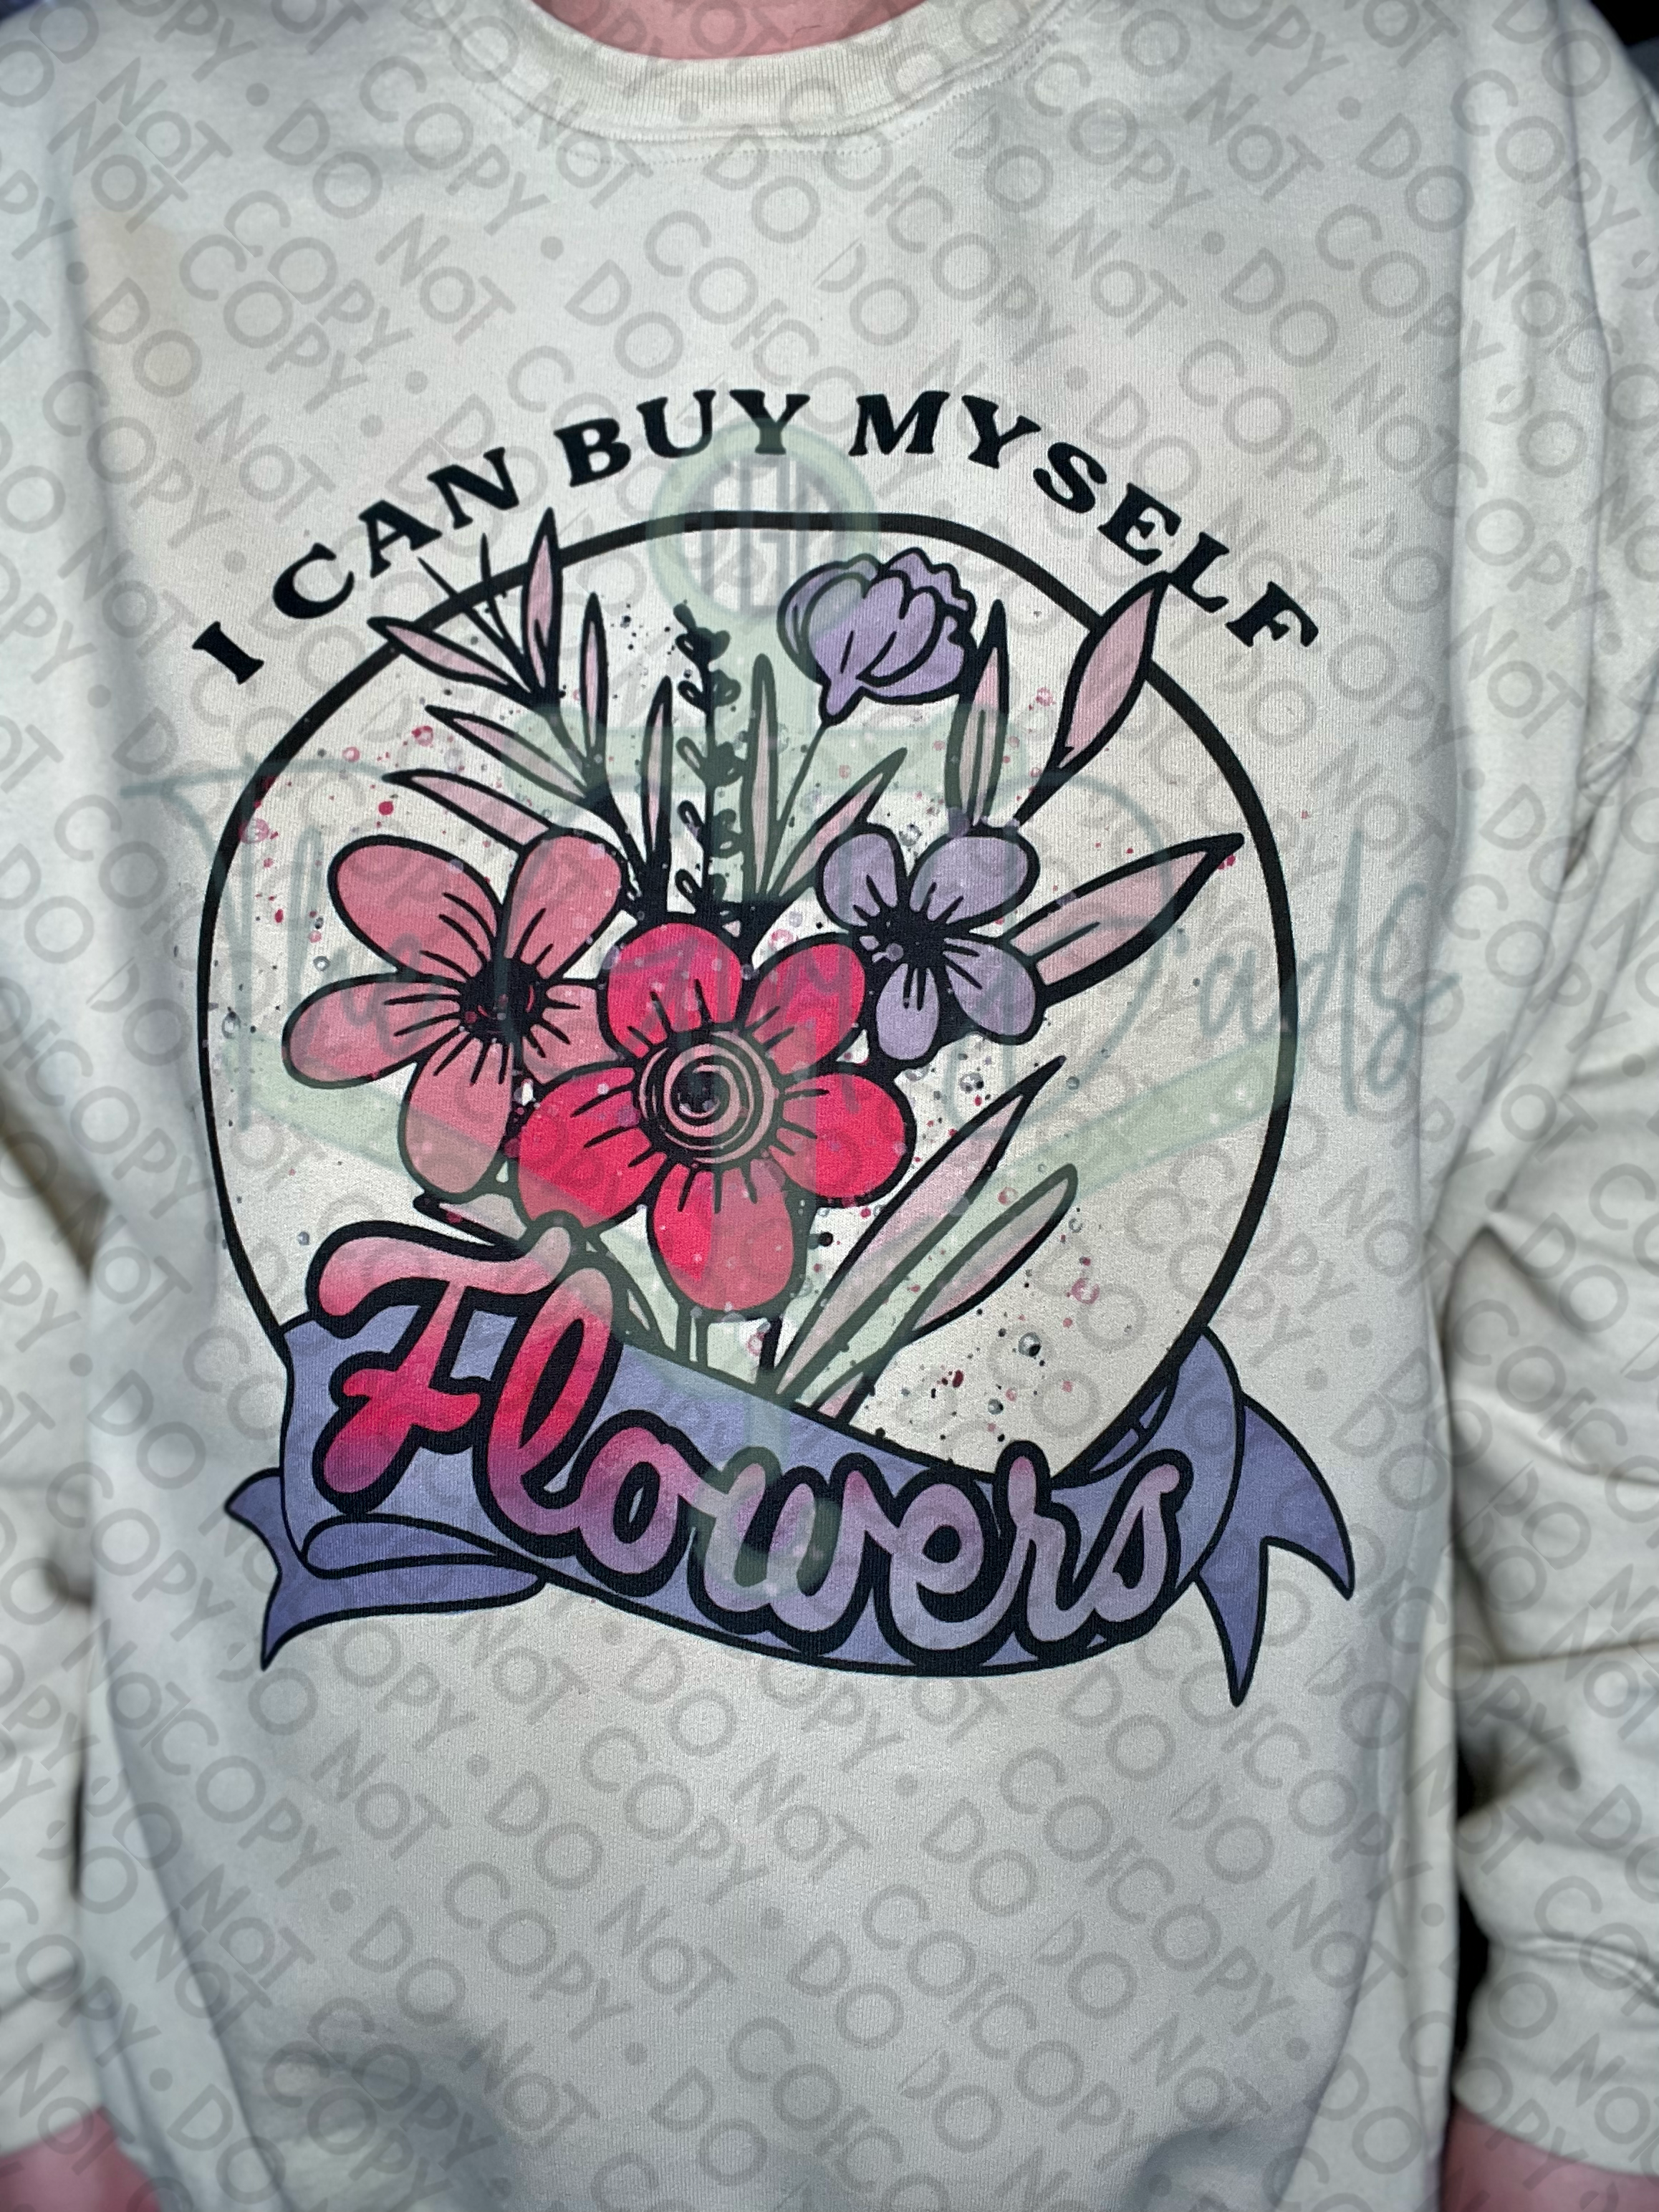 I Can Buy Myself Flowers Color Top Design